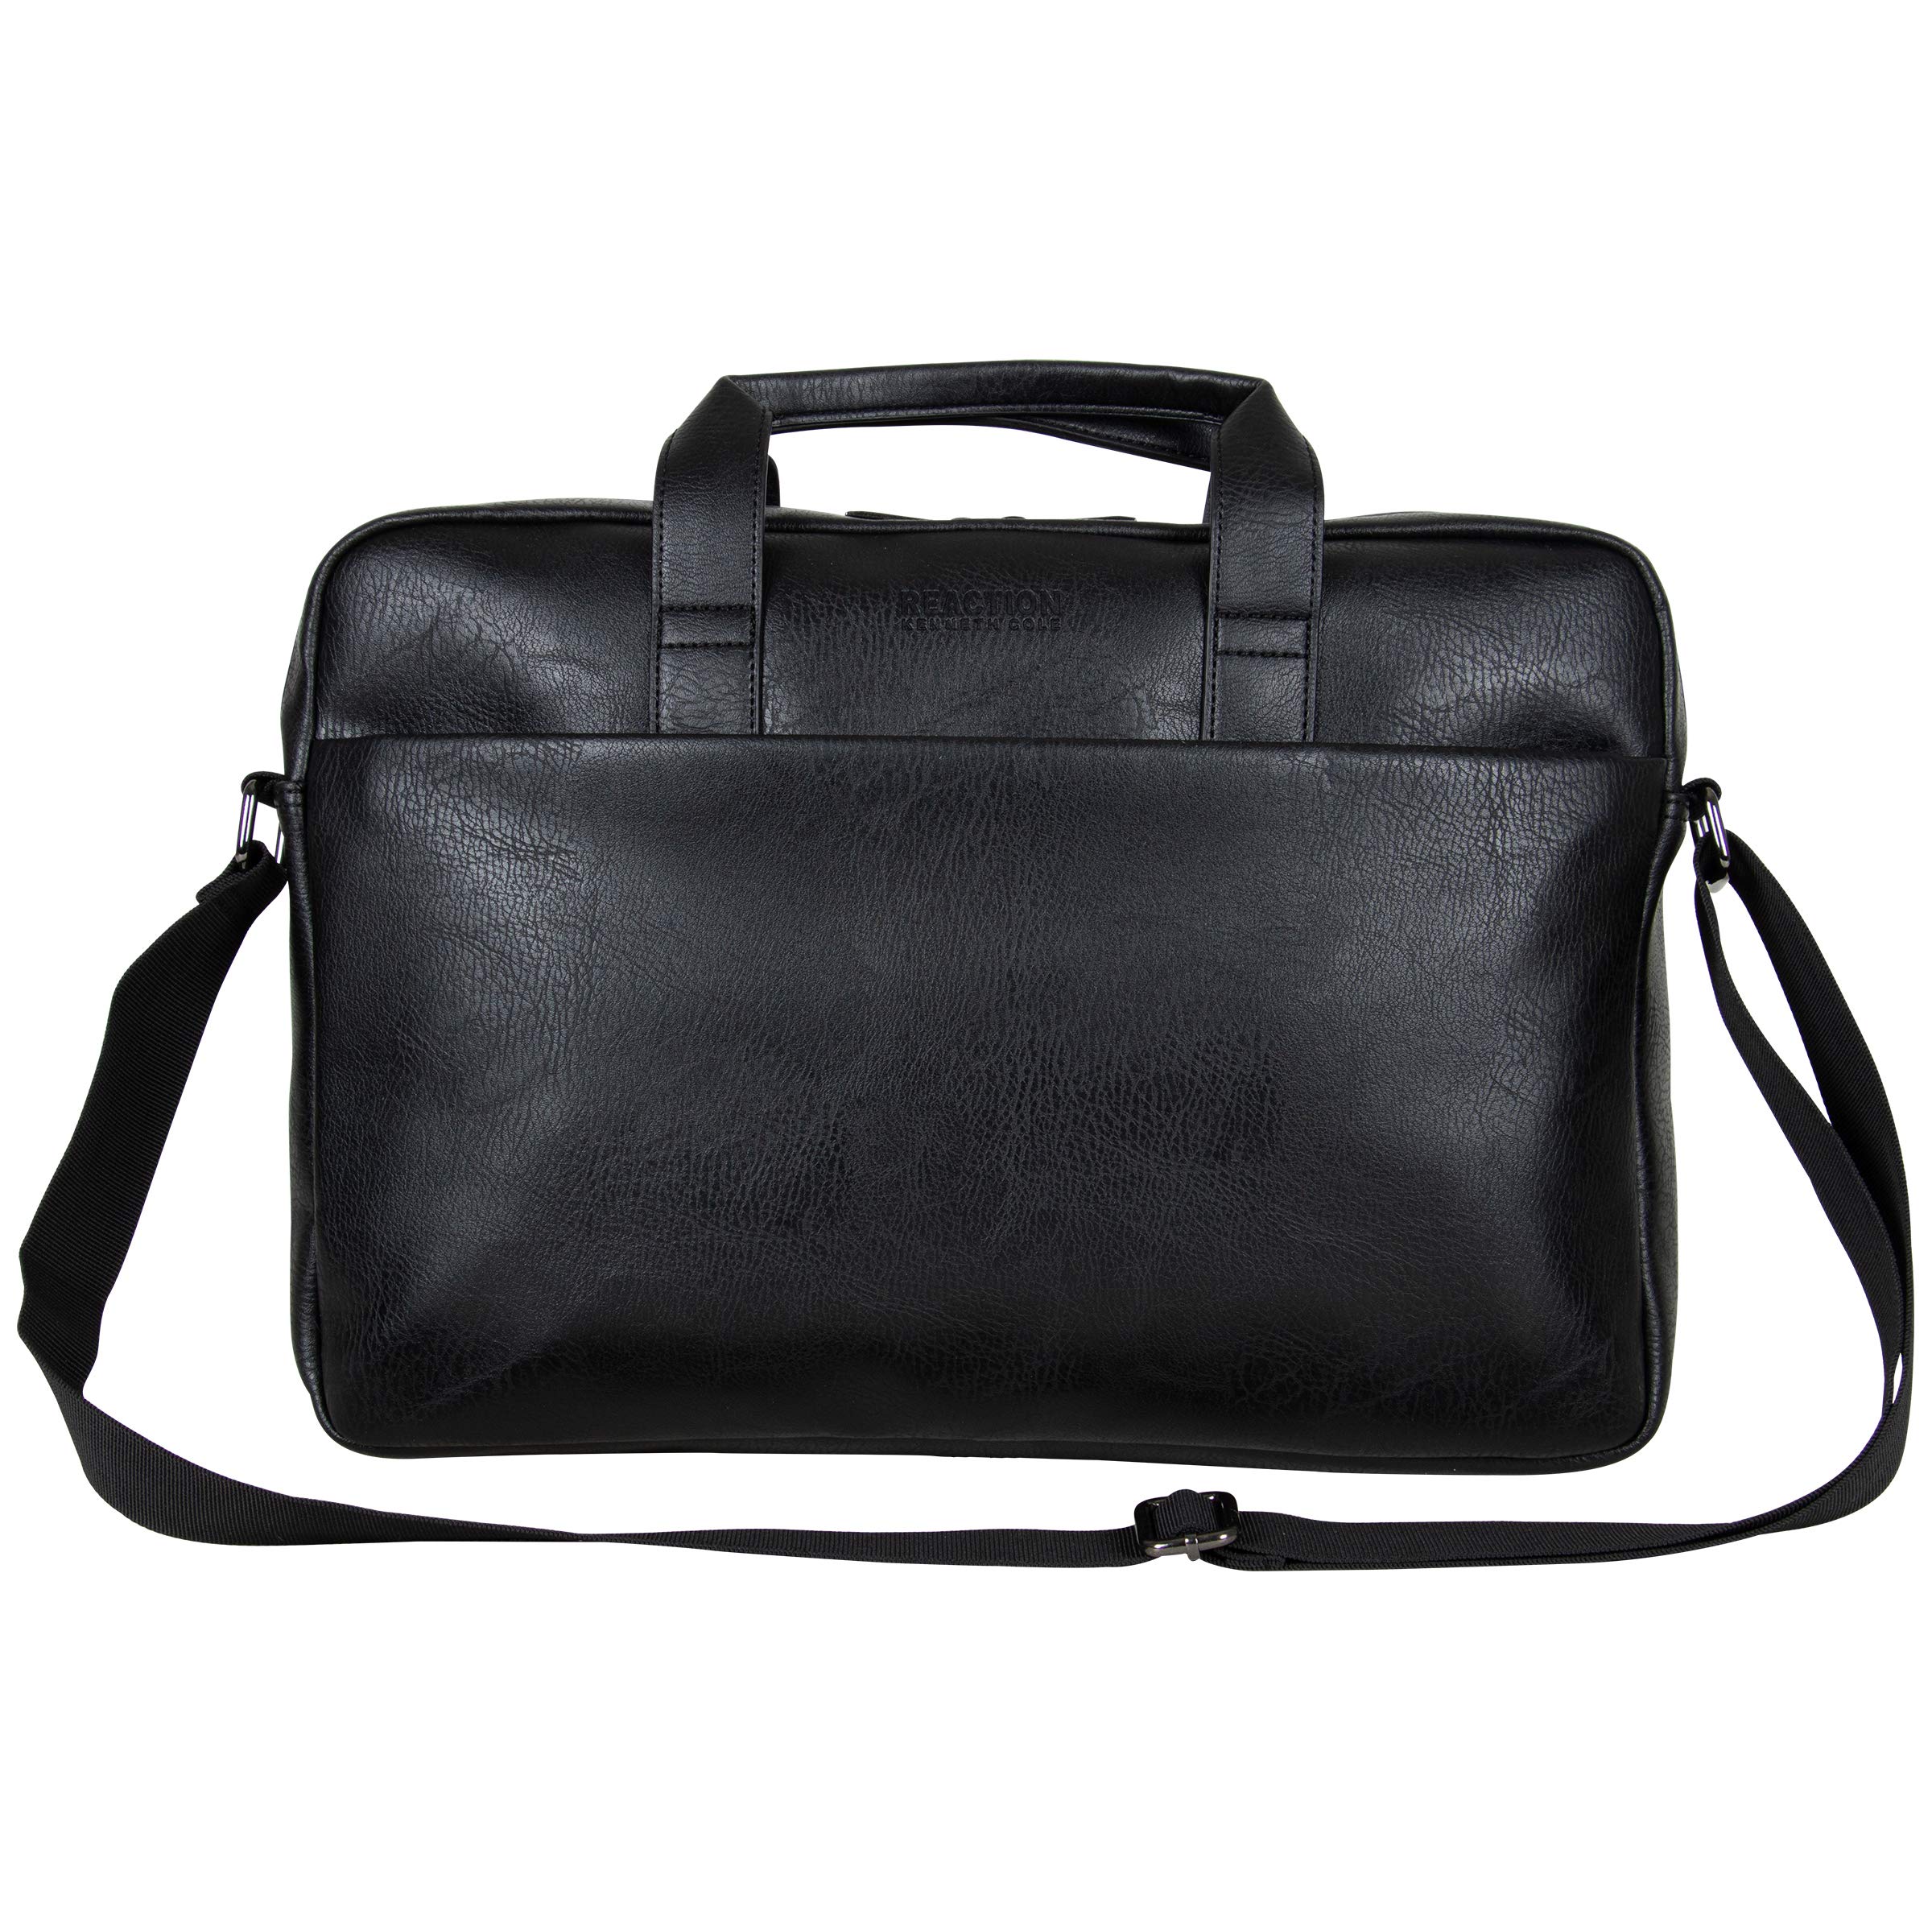 Kenneth Cole REACTION Modern Dilemma Pebbled Faux Leather 15.6" Laptop & Tablet Business Case Bag, Black-Style #2, One Size